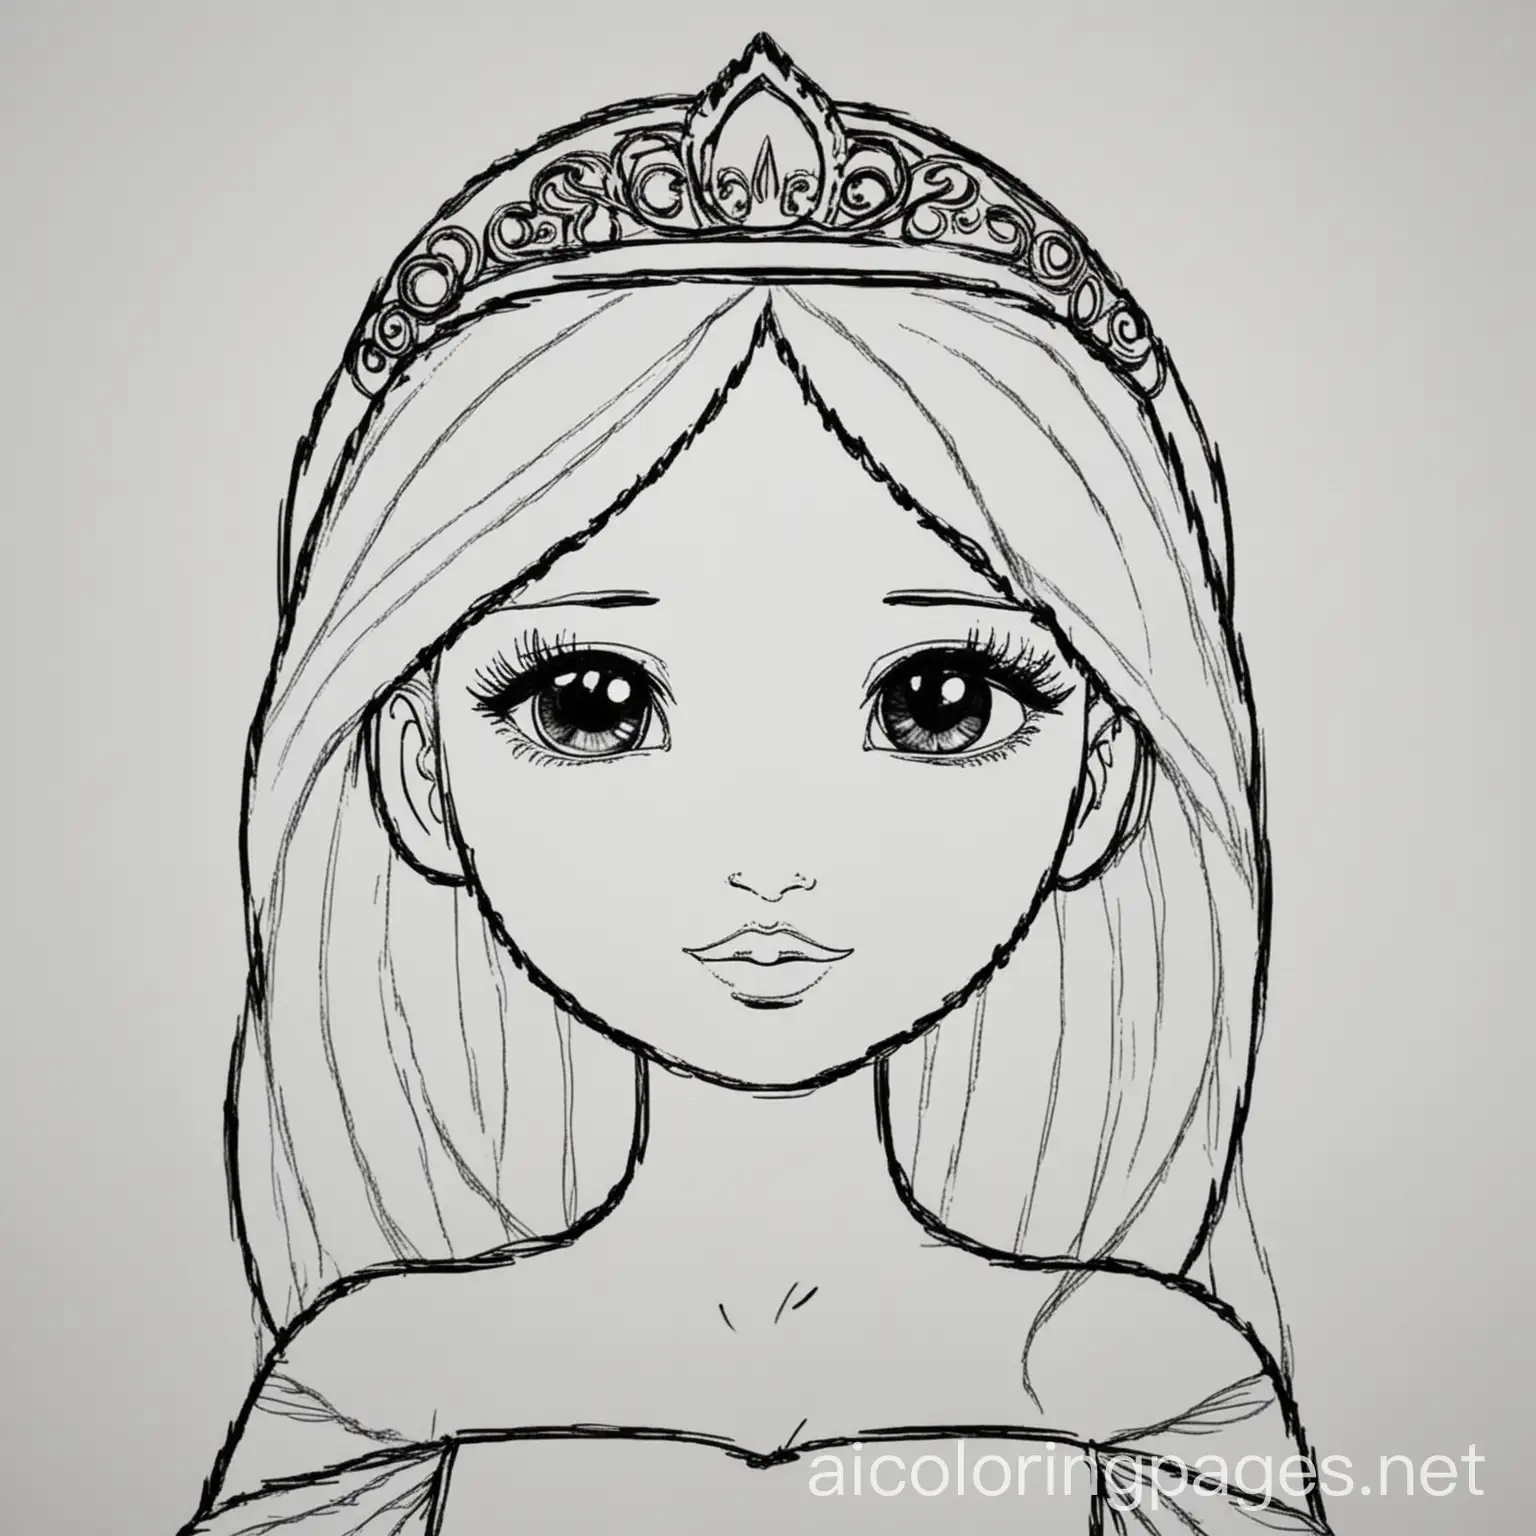 princess, Coloring Page, black and white, line art, white background, Simplicity, Ample White Space. The background of the coloring page is plain white to make it easy for young children to color within the lines. The outlines of all the subjects are easy to distinguish, making it simple for kids to color without too much difficulty, Coloring Page, black and white, line art, white background, Simplicity, Ample White Space. The background of the coloring page is plain white to make it easy for young children to color within the lines. The outlines of all the subjects are easy to distinguish, making it simple for kids to color without too much difficulty